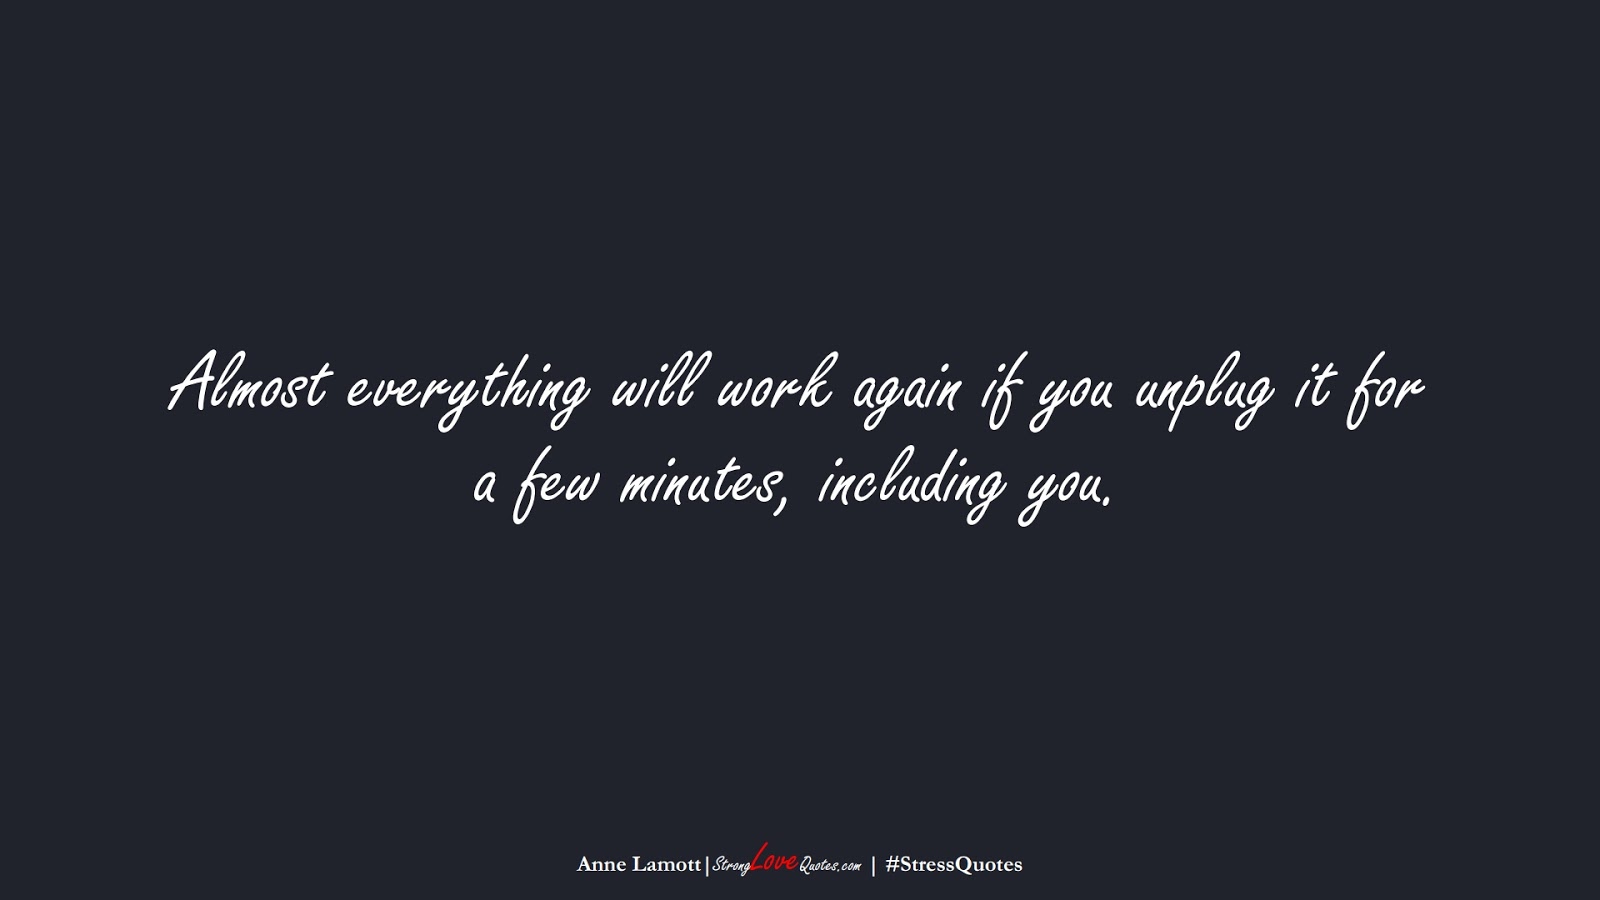 Almost everything will work again if you unplug it for a few minutes, including you. (Anne Lamott);  #StressQuotes